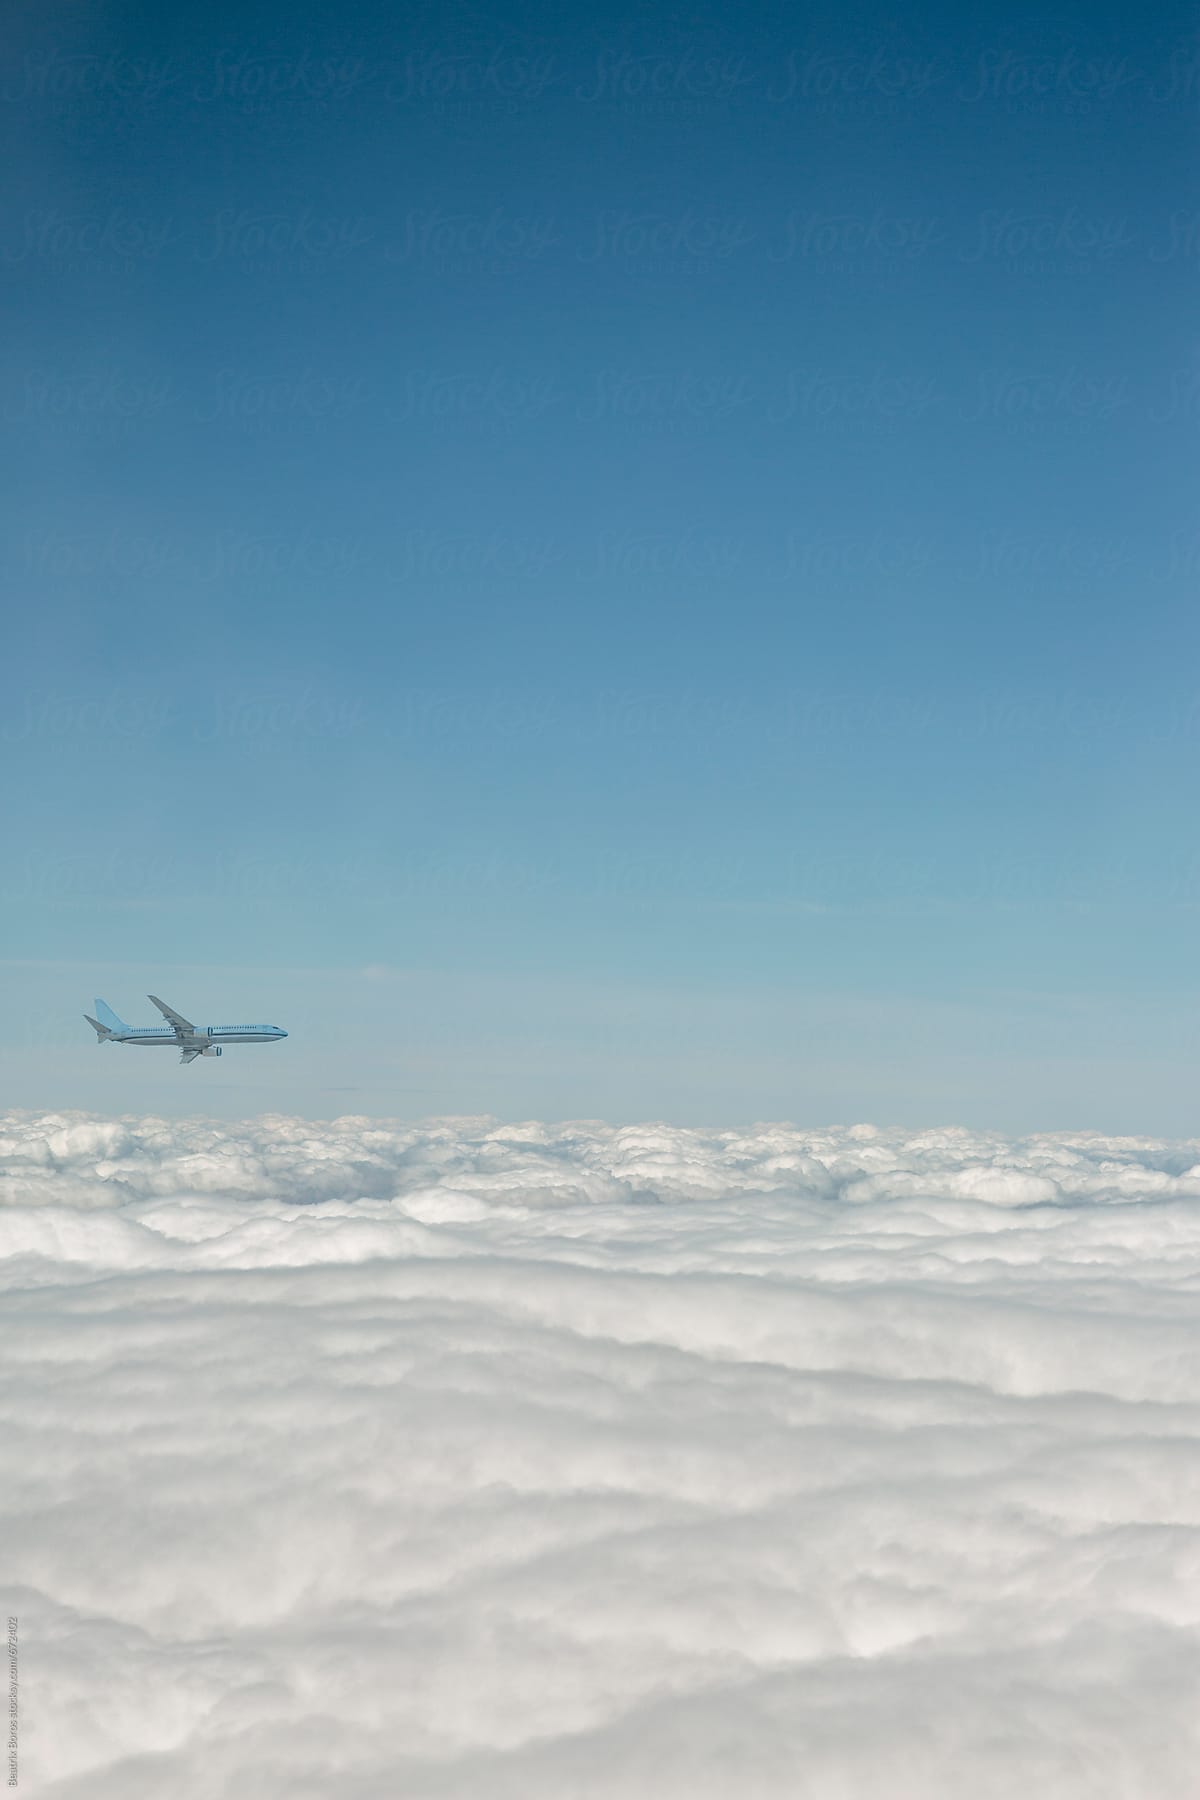 Aeroplane over the clouds flying in the sky towards its destination